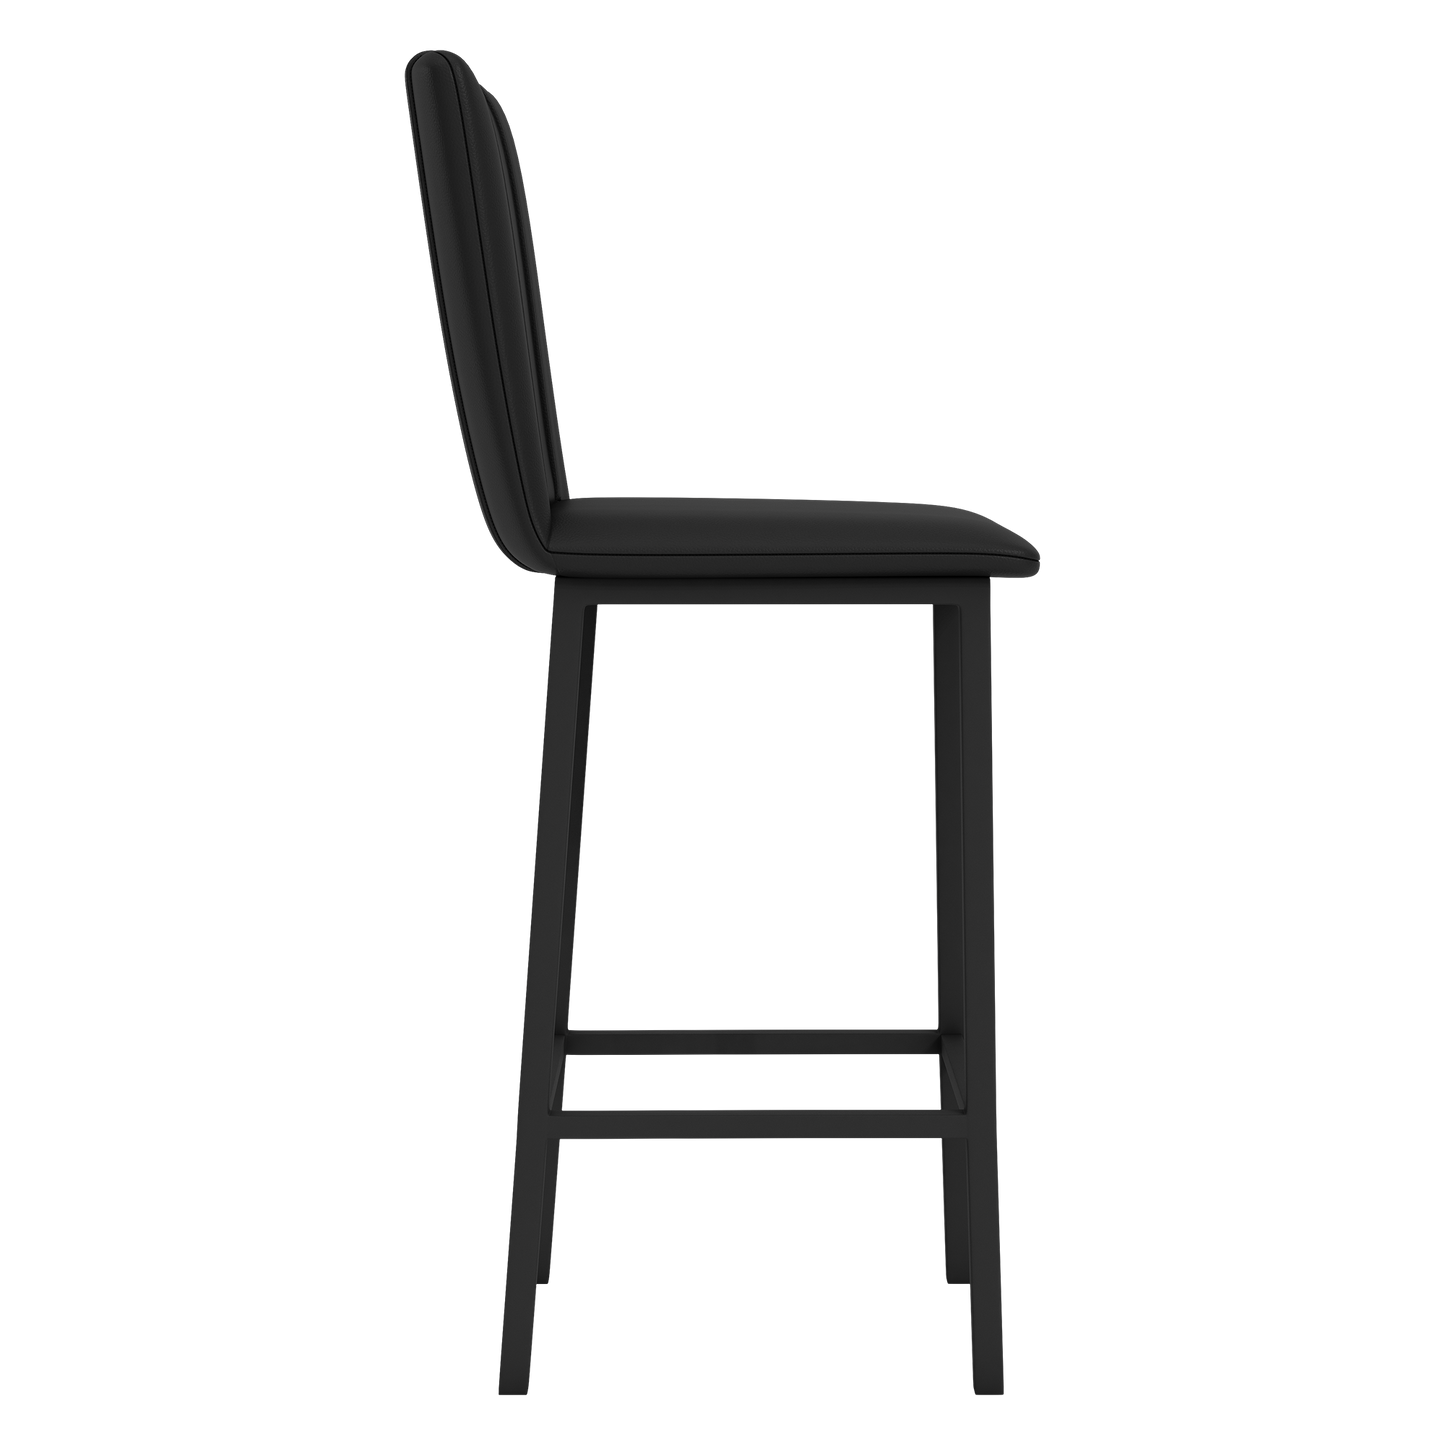 Bar Stool 500 with Chicago Bears Secondary Logo Set of 2